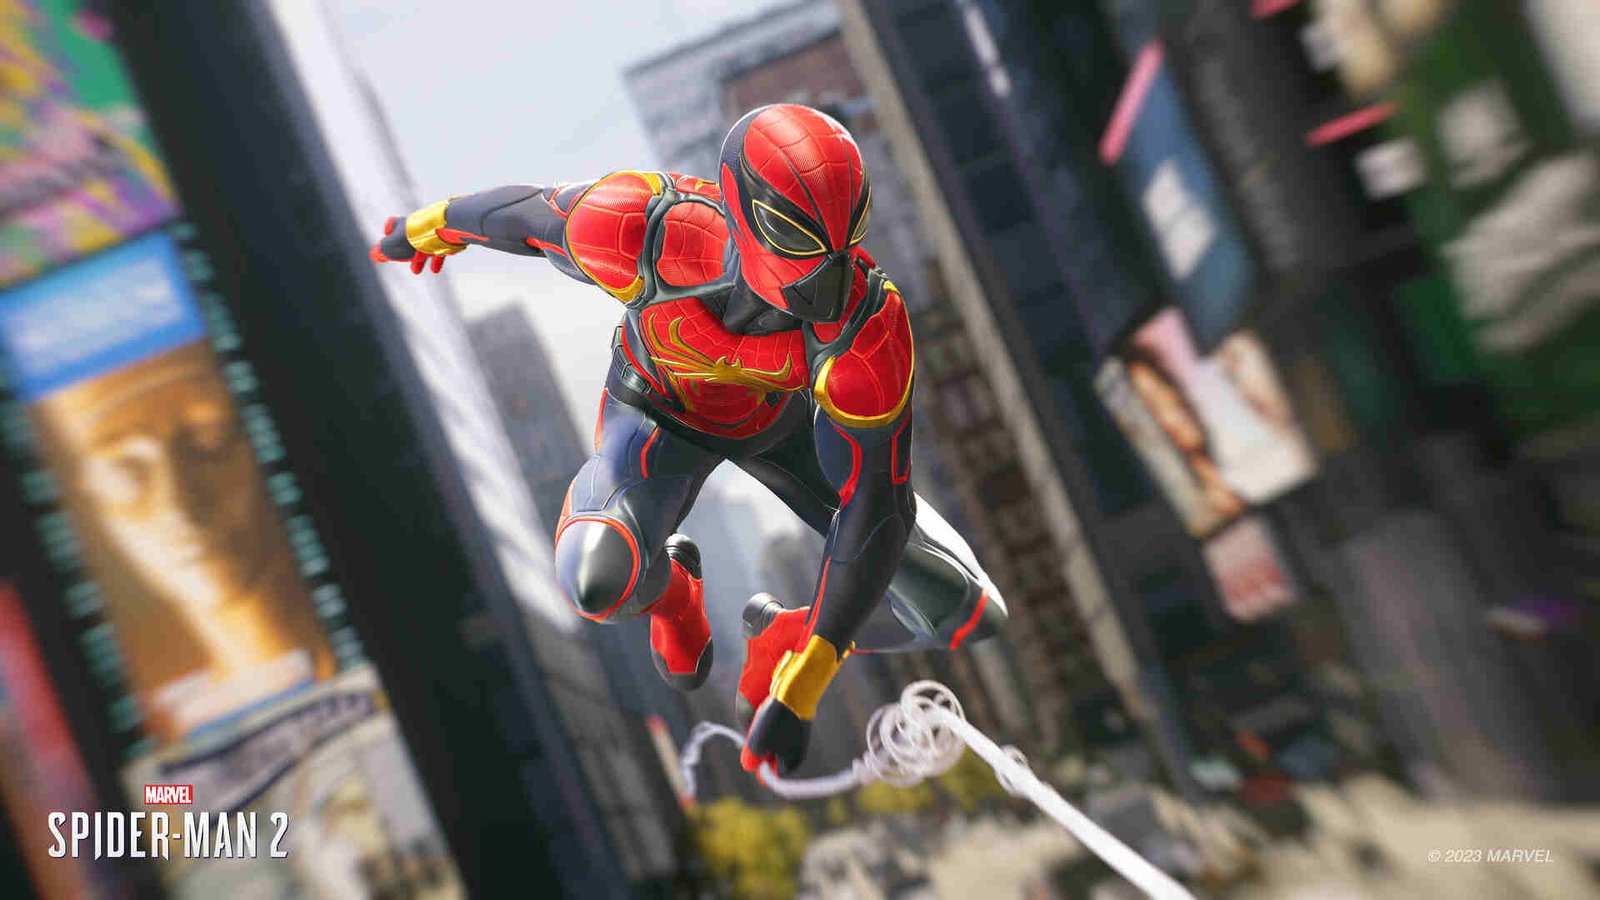 Marvel's Spider-Man 2 Unable to Load Save Game Issue: Is there any fix yet